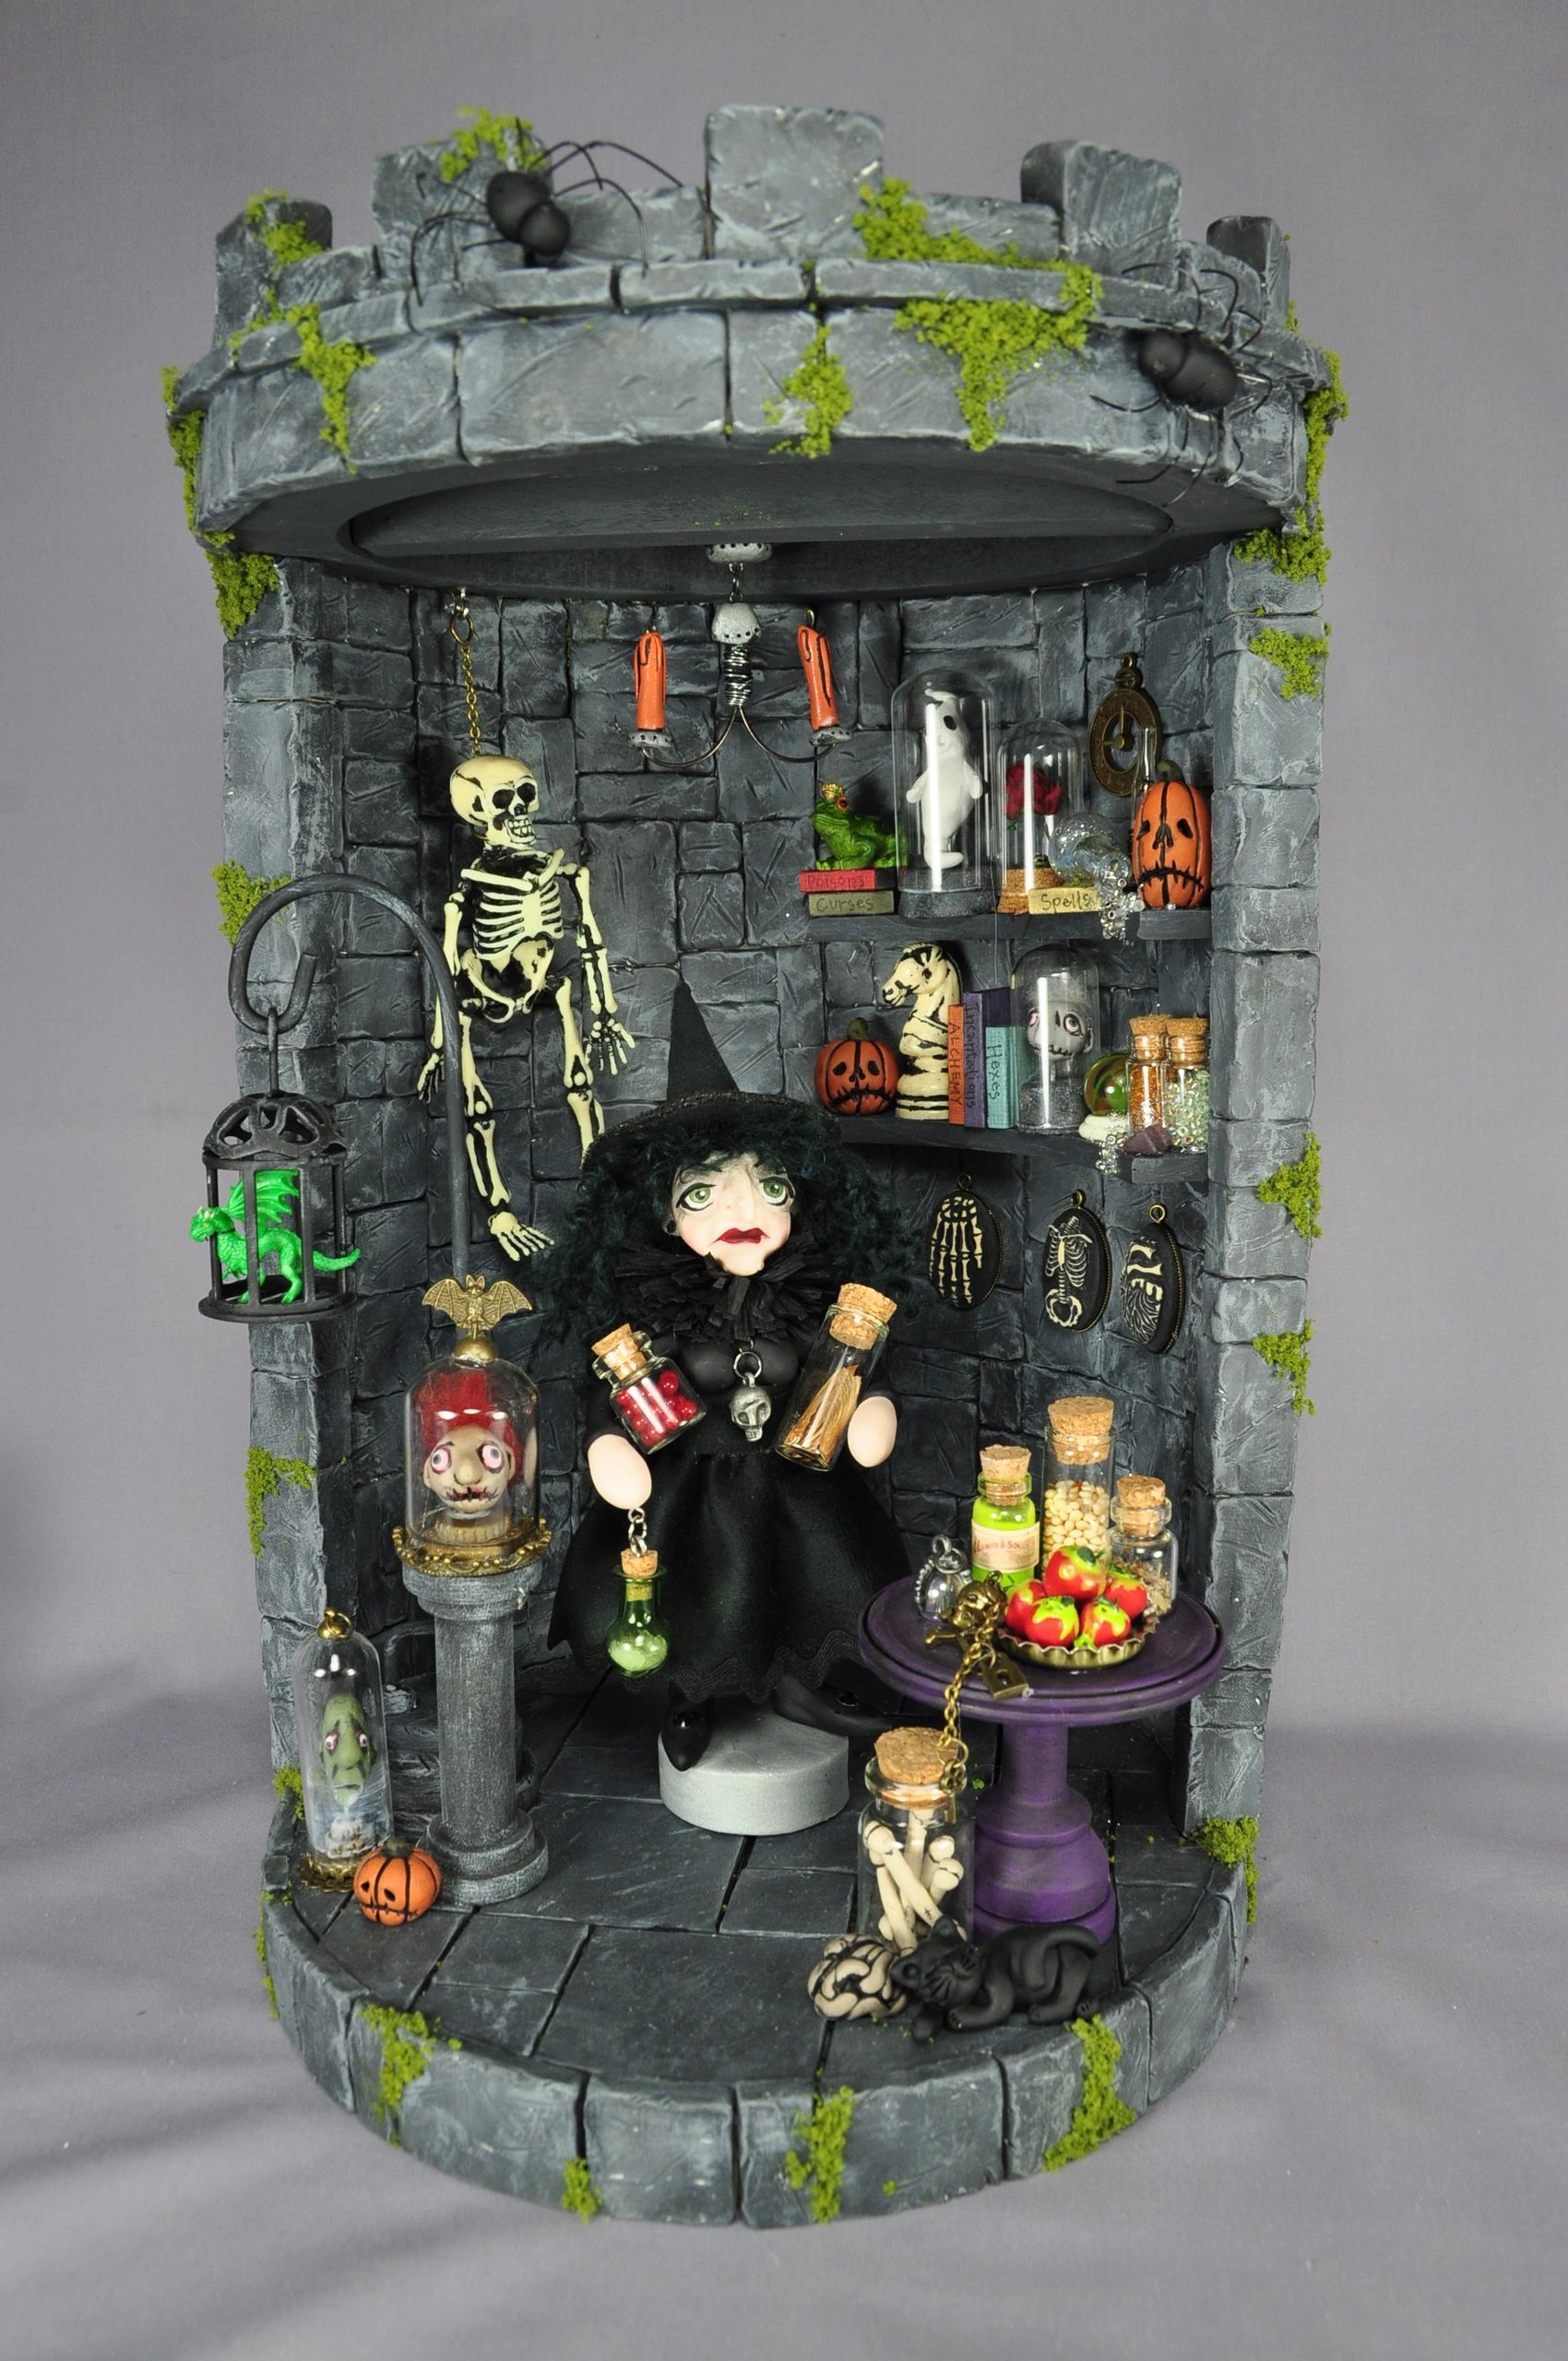 Intricately detailed mixed-media castle shadow box vignette with wicked witch polymer clay art doll